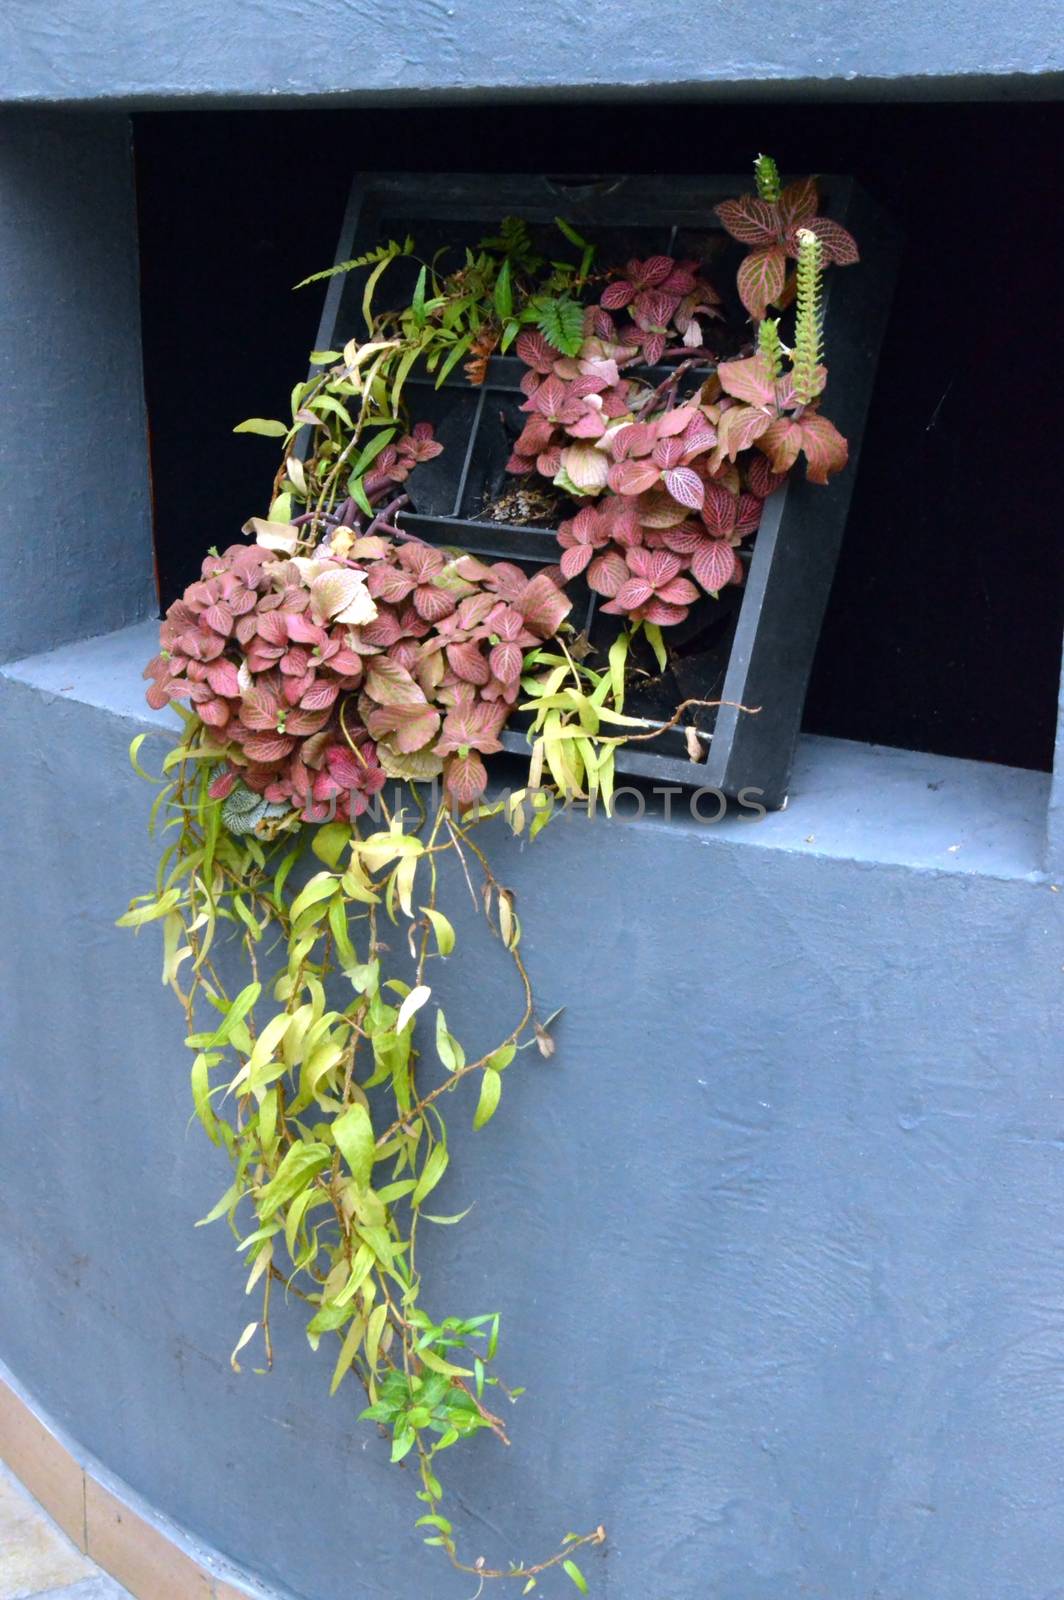 Potted flowers in a niche of a wall